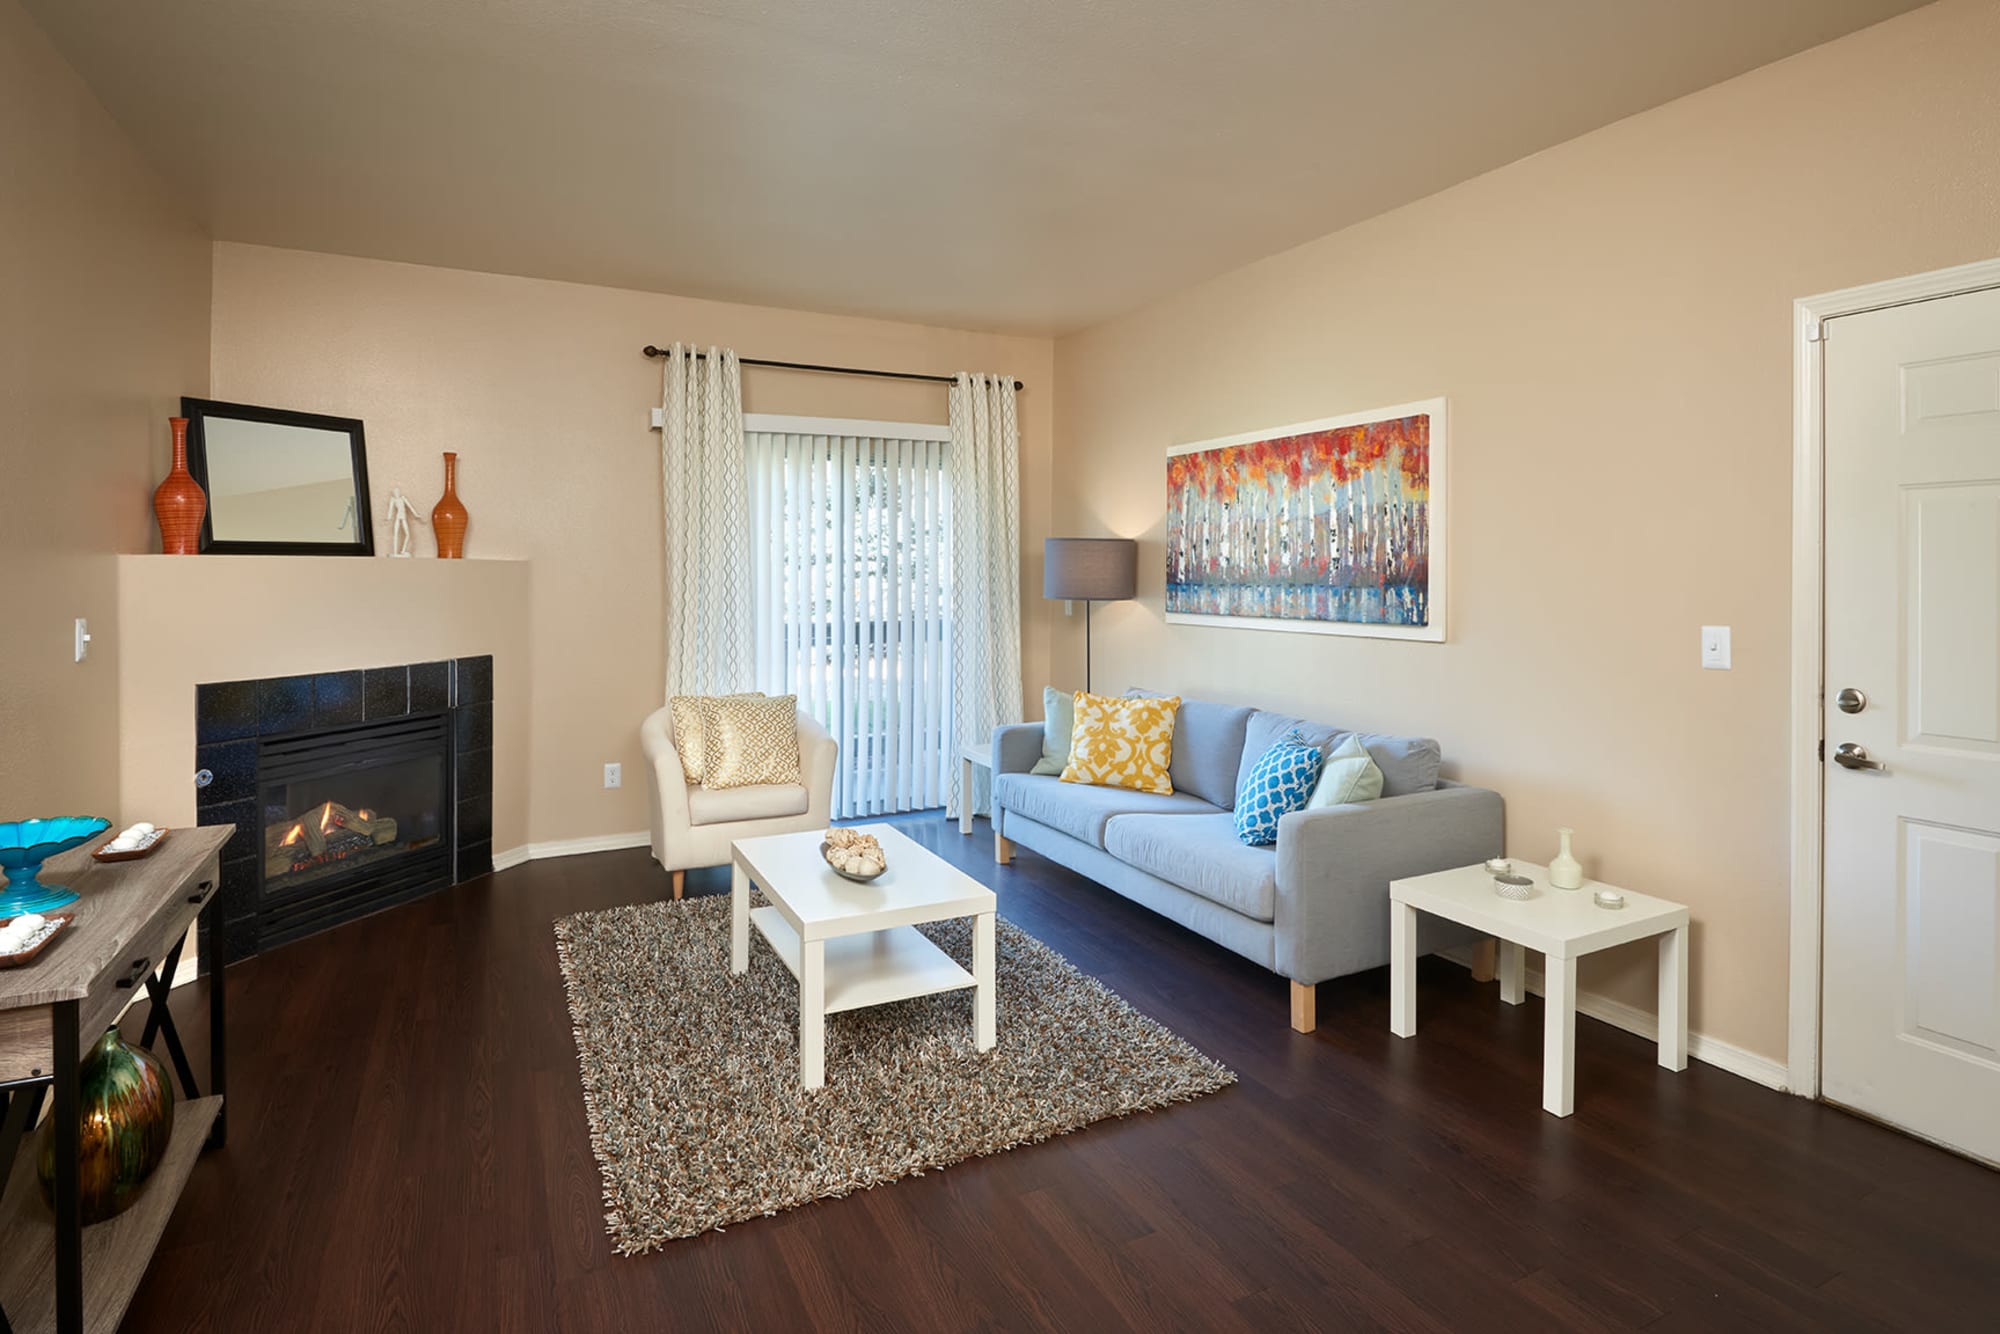 Living room with a fireplace at Crossroads at City Center Apartments in Aurora, Colorado